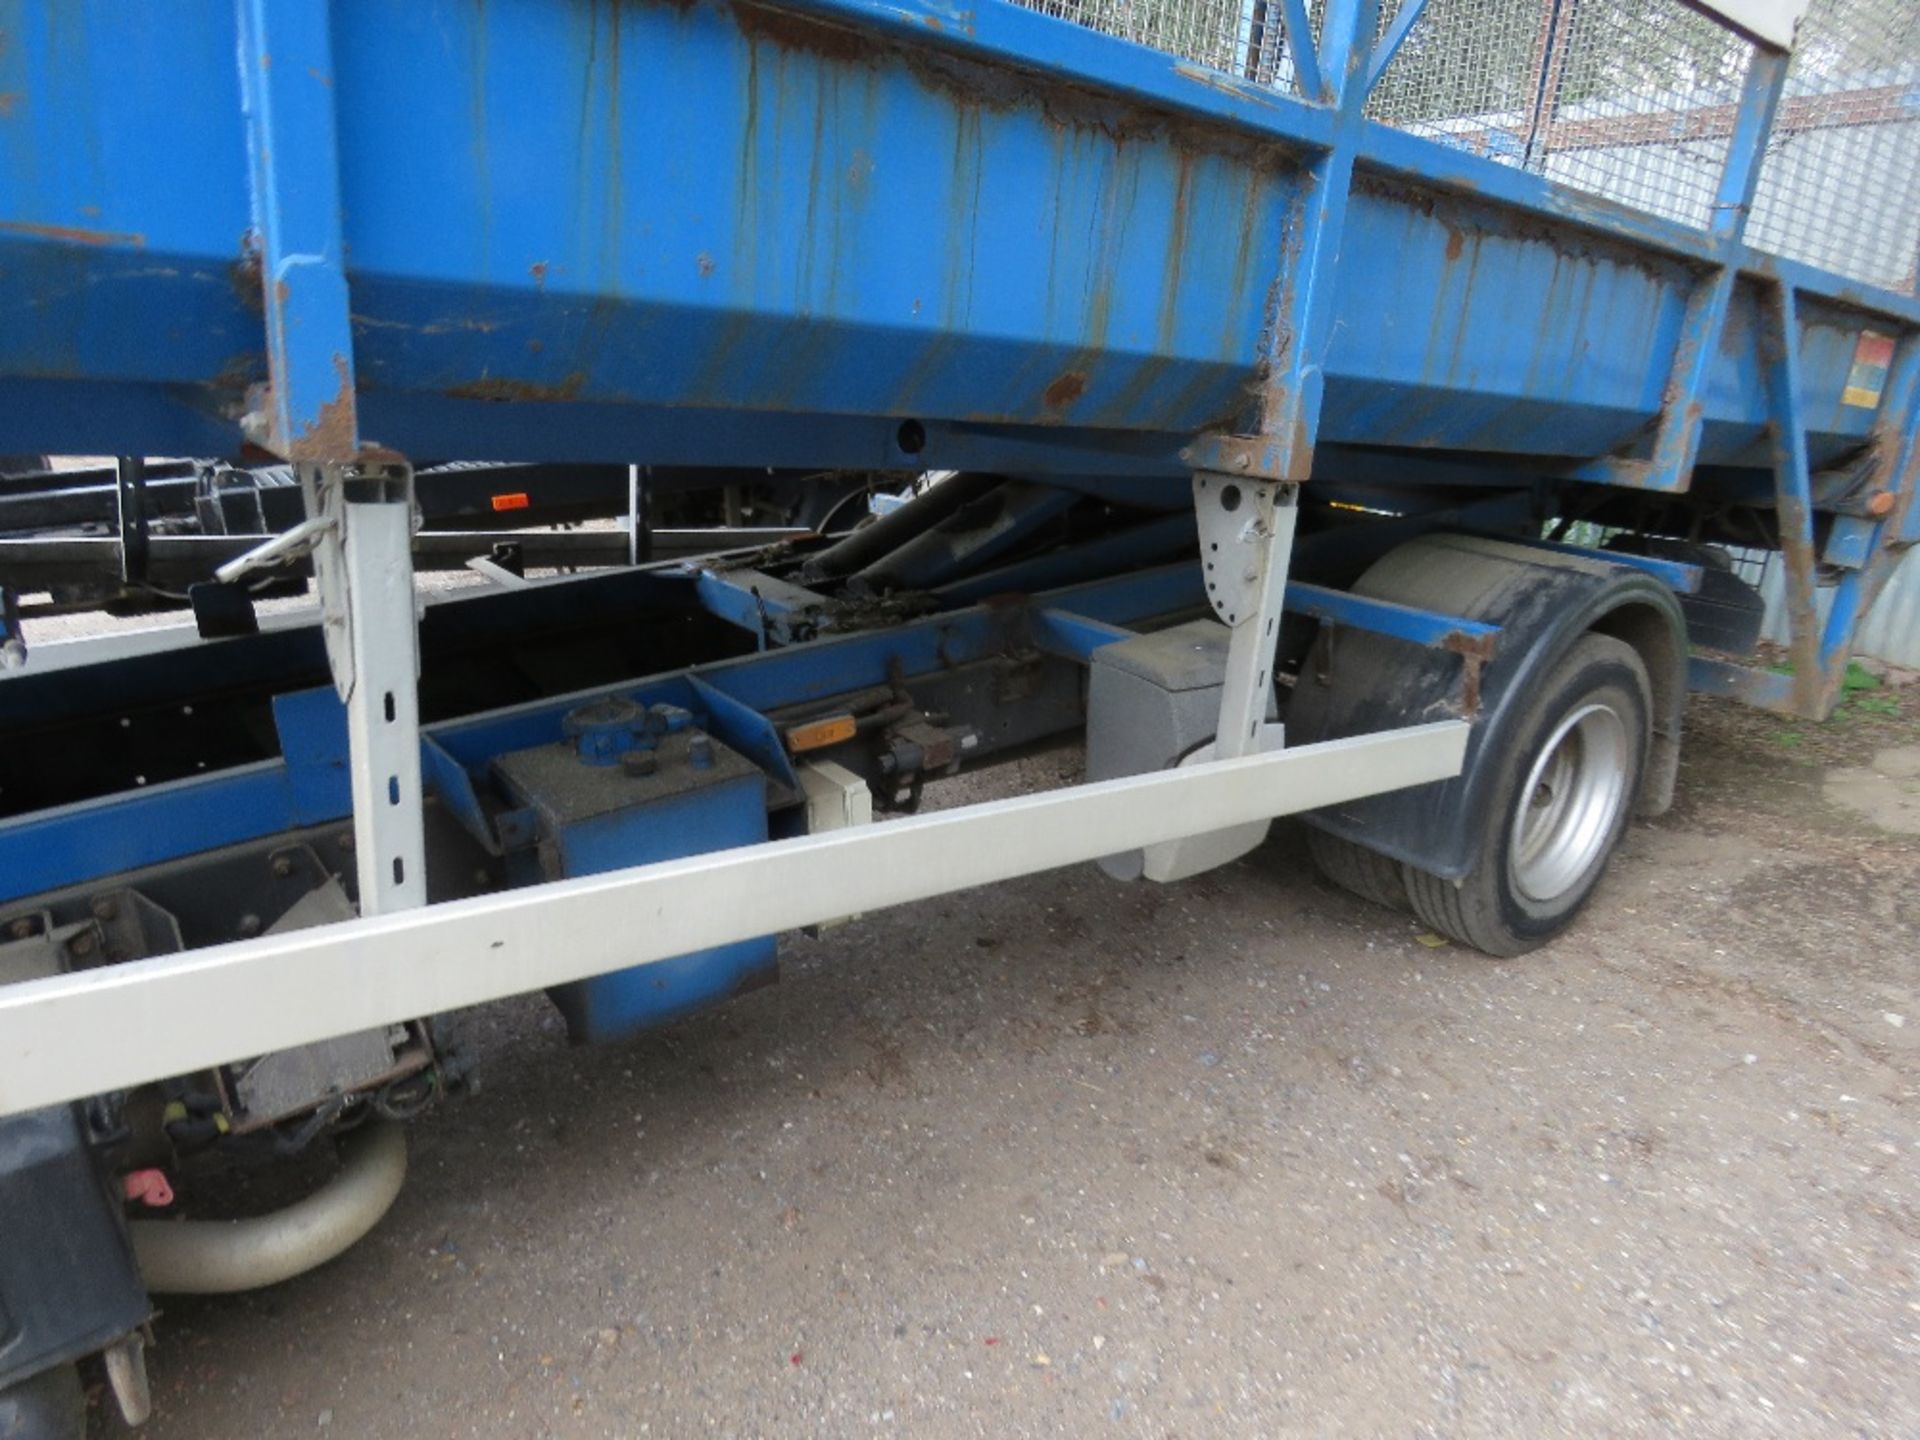 RENAULT MIDLUM 190 7.5TONNE TIPPER REG:BU08 FCG. WITH TAIL LIFT. MESH SIDES. 184,202 REC KMS. WITH V - Image 12 of 16